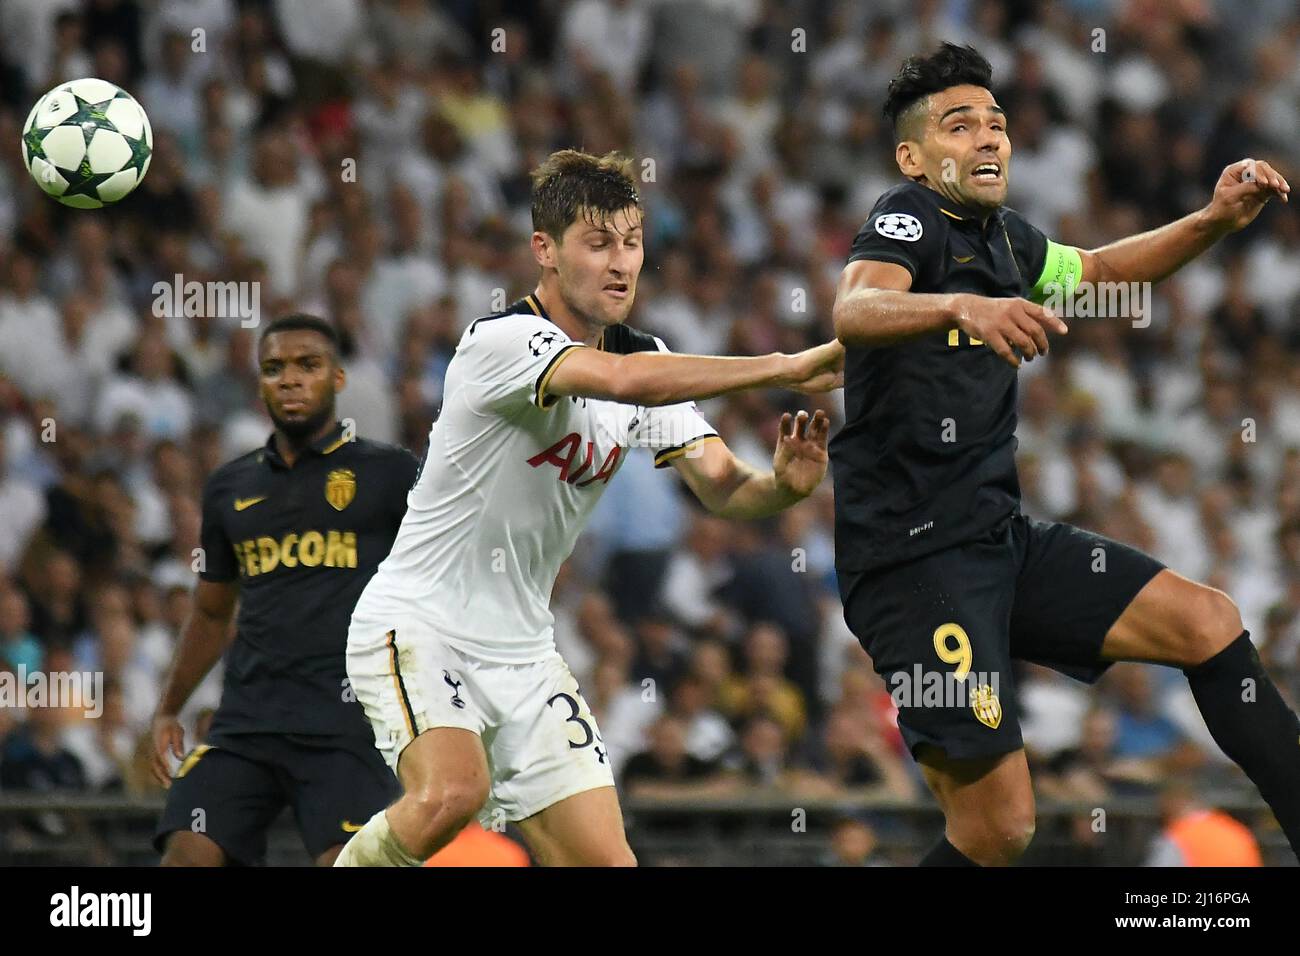 MANCHESTER, ENGLAND - SEPTEMBER 14, 2016: Ben  Davies (L) of Tottenham and Radamel Falcao (R) of Monaco pictured in action during the UEFA Champions League Group E game between Tottenham Hotspur and AS Monaco at Wembley Stadium. Copyright: Cosmin Iftode/Picstaff Stock Photo